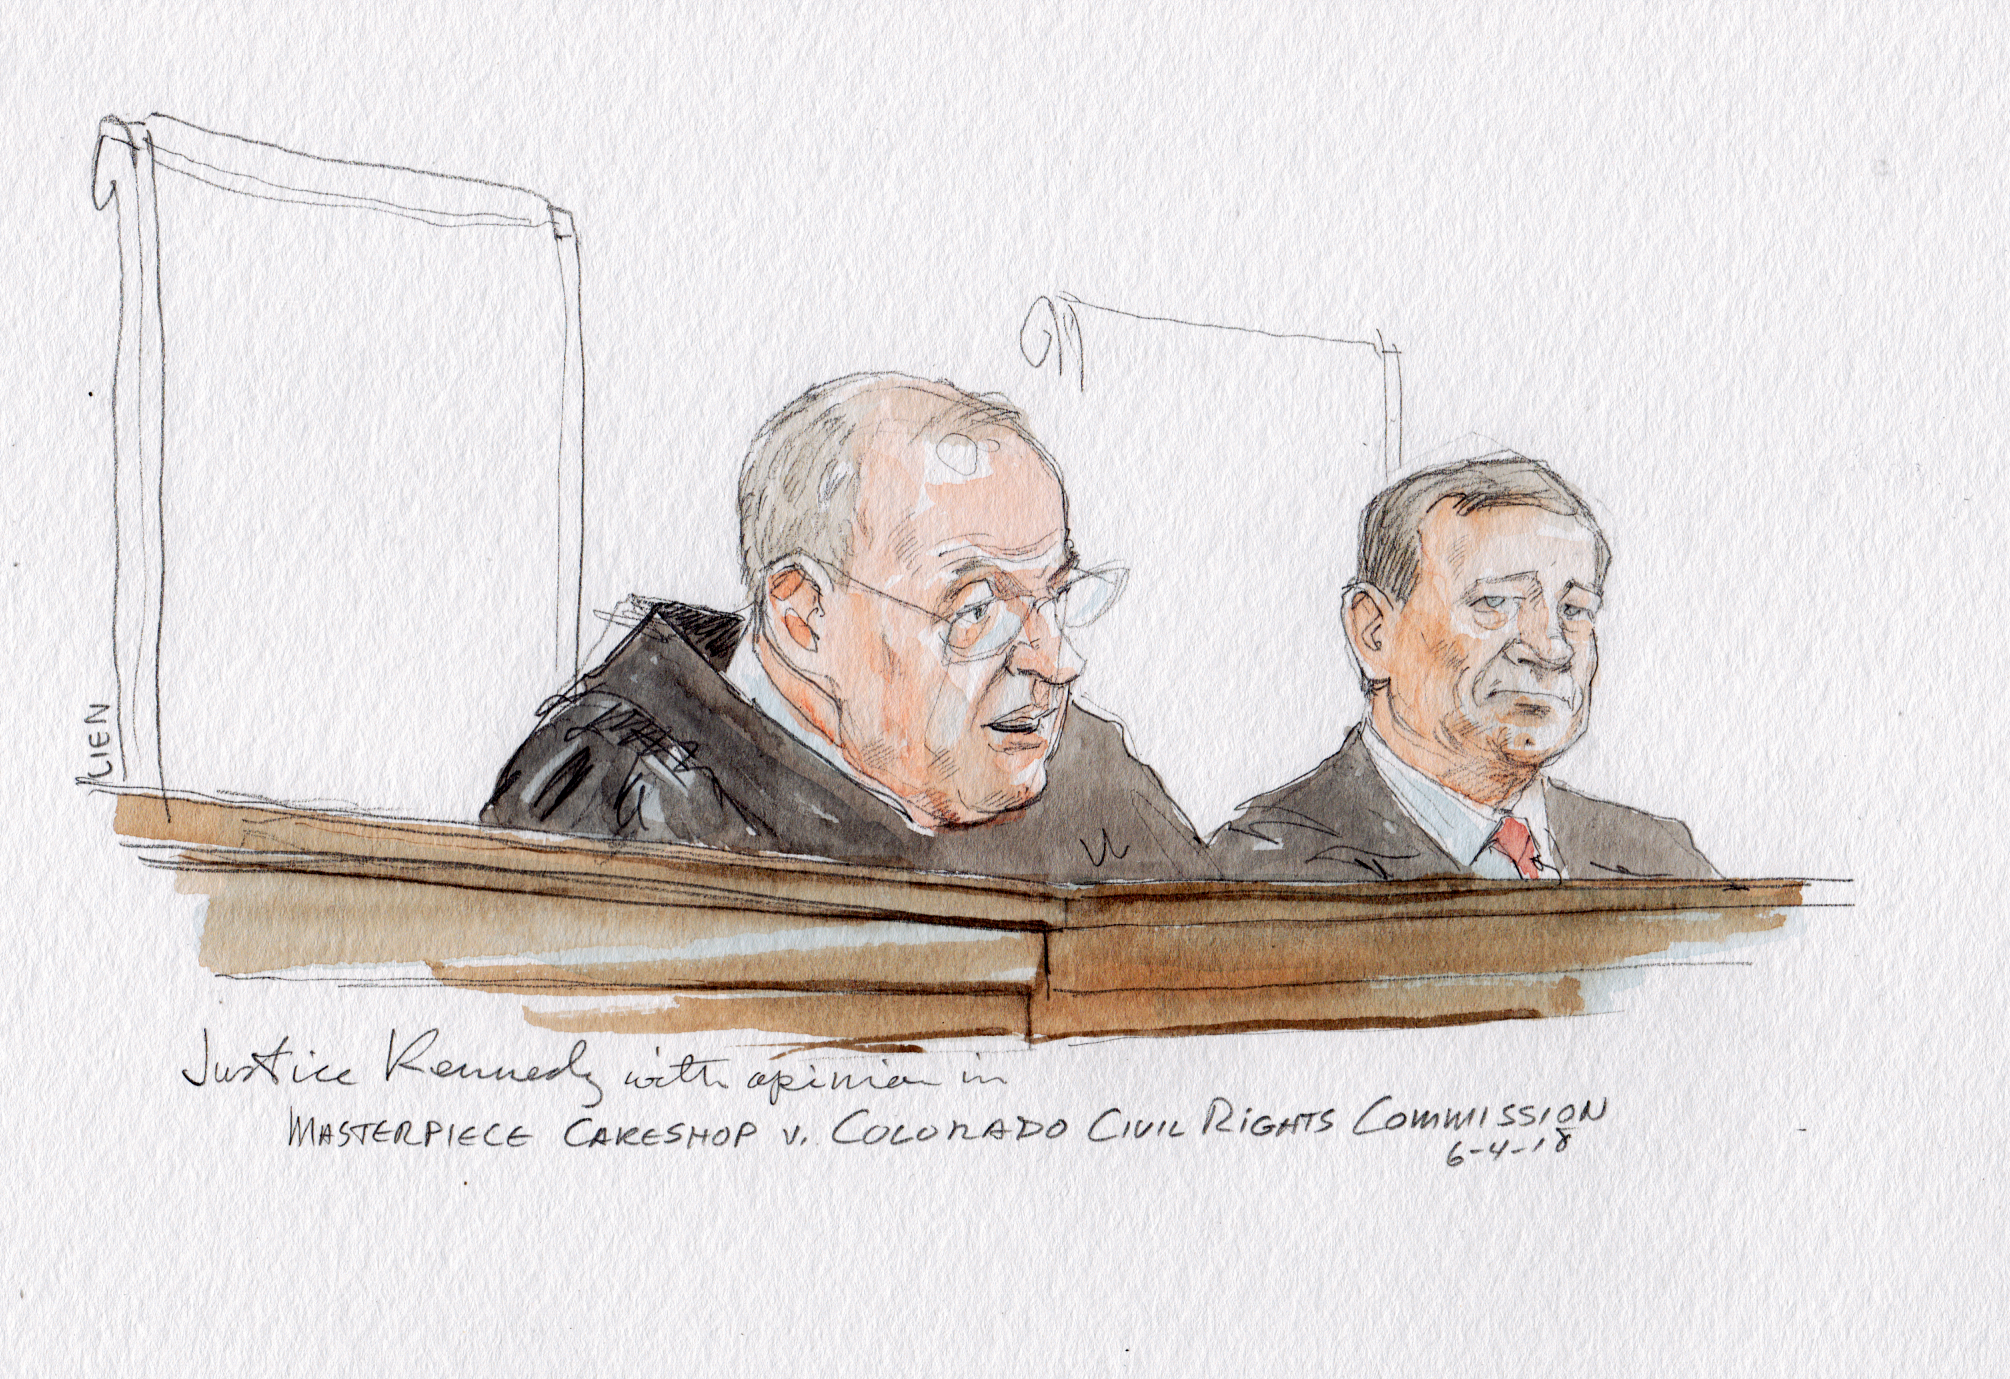 Arthur Lien's sketch of Justice Anthony Kennedy delivering the U.S. Supreme Court opinion in the Masterpiece Cakeshop case on Monday, June 4. (Art Lien—©2018 Arthur Lien. No usage without prior consent. All rights reserved)